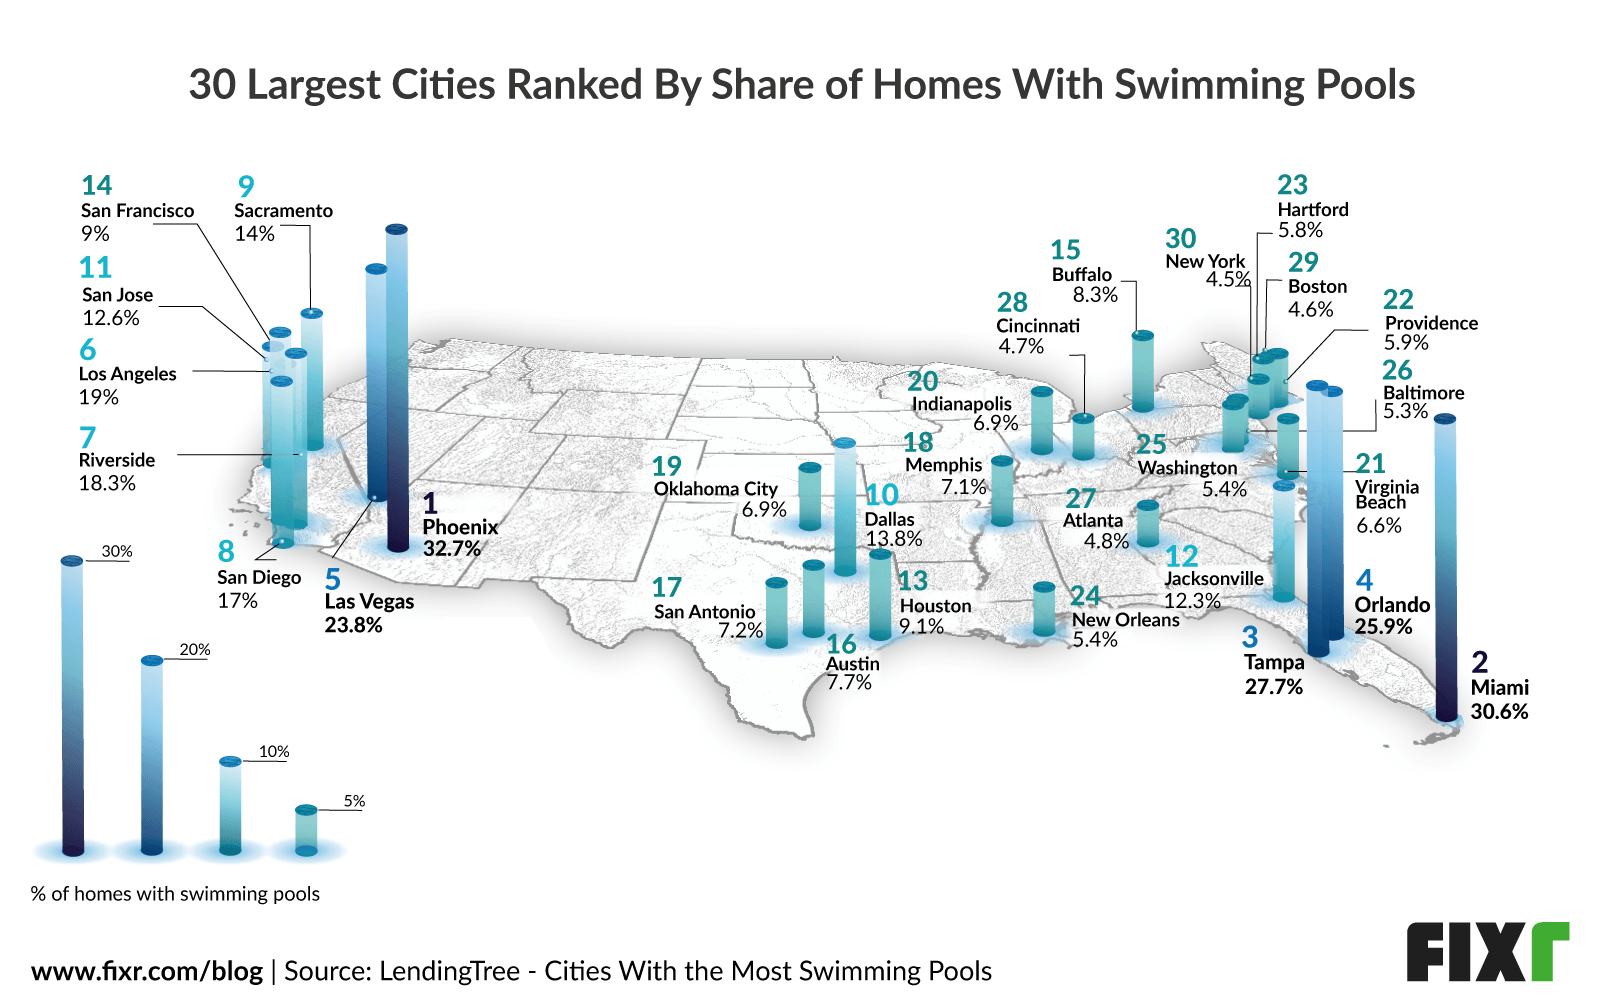 Cities in the U.S with most homes with swimming pools installed